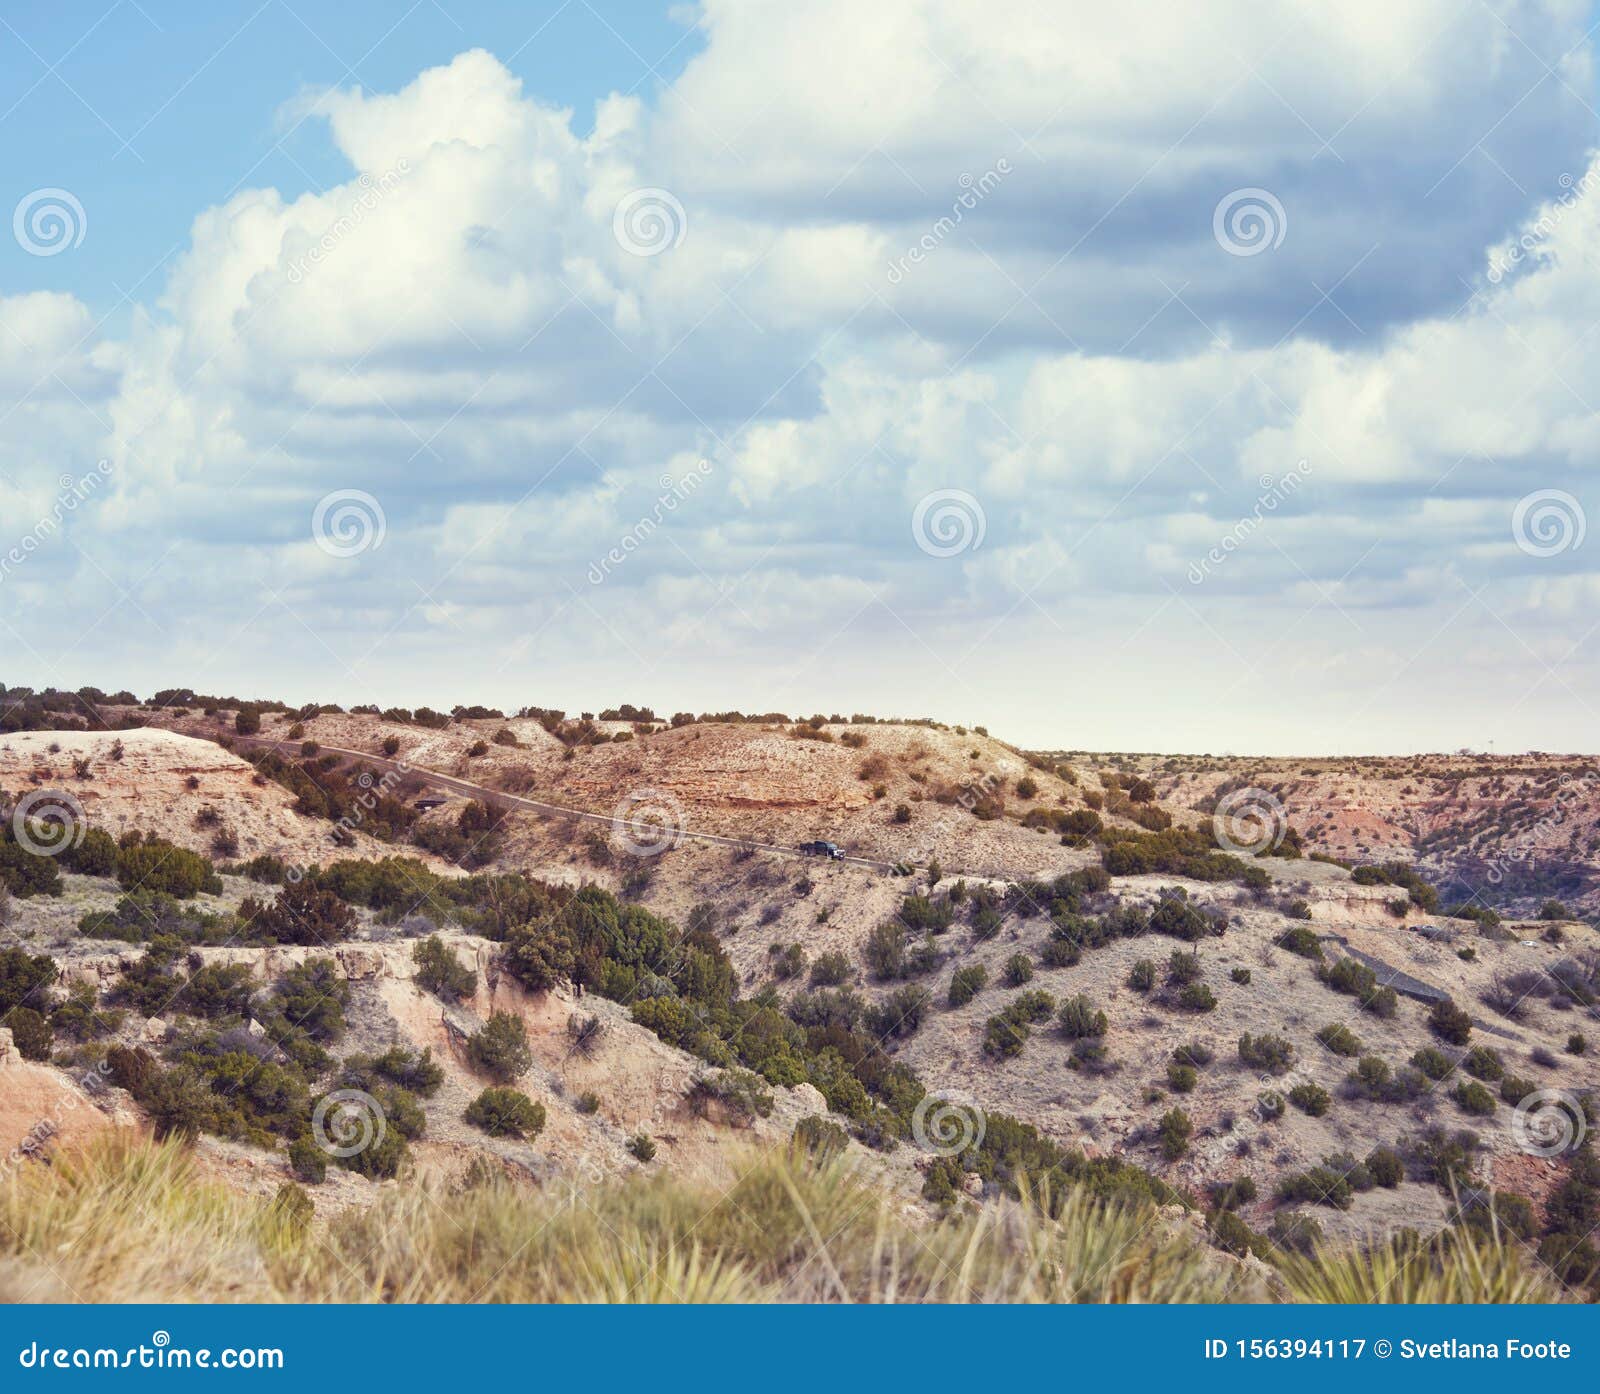 view at palo duro canyon state park in texas